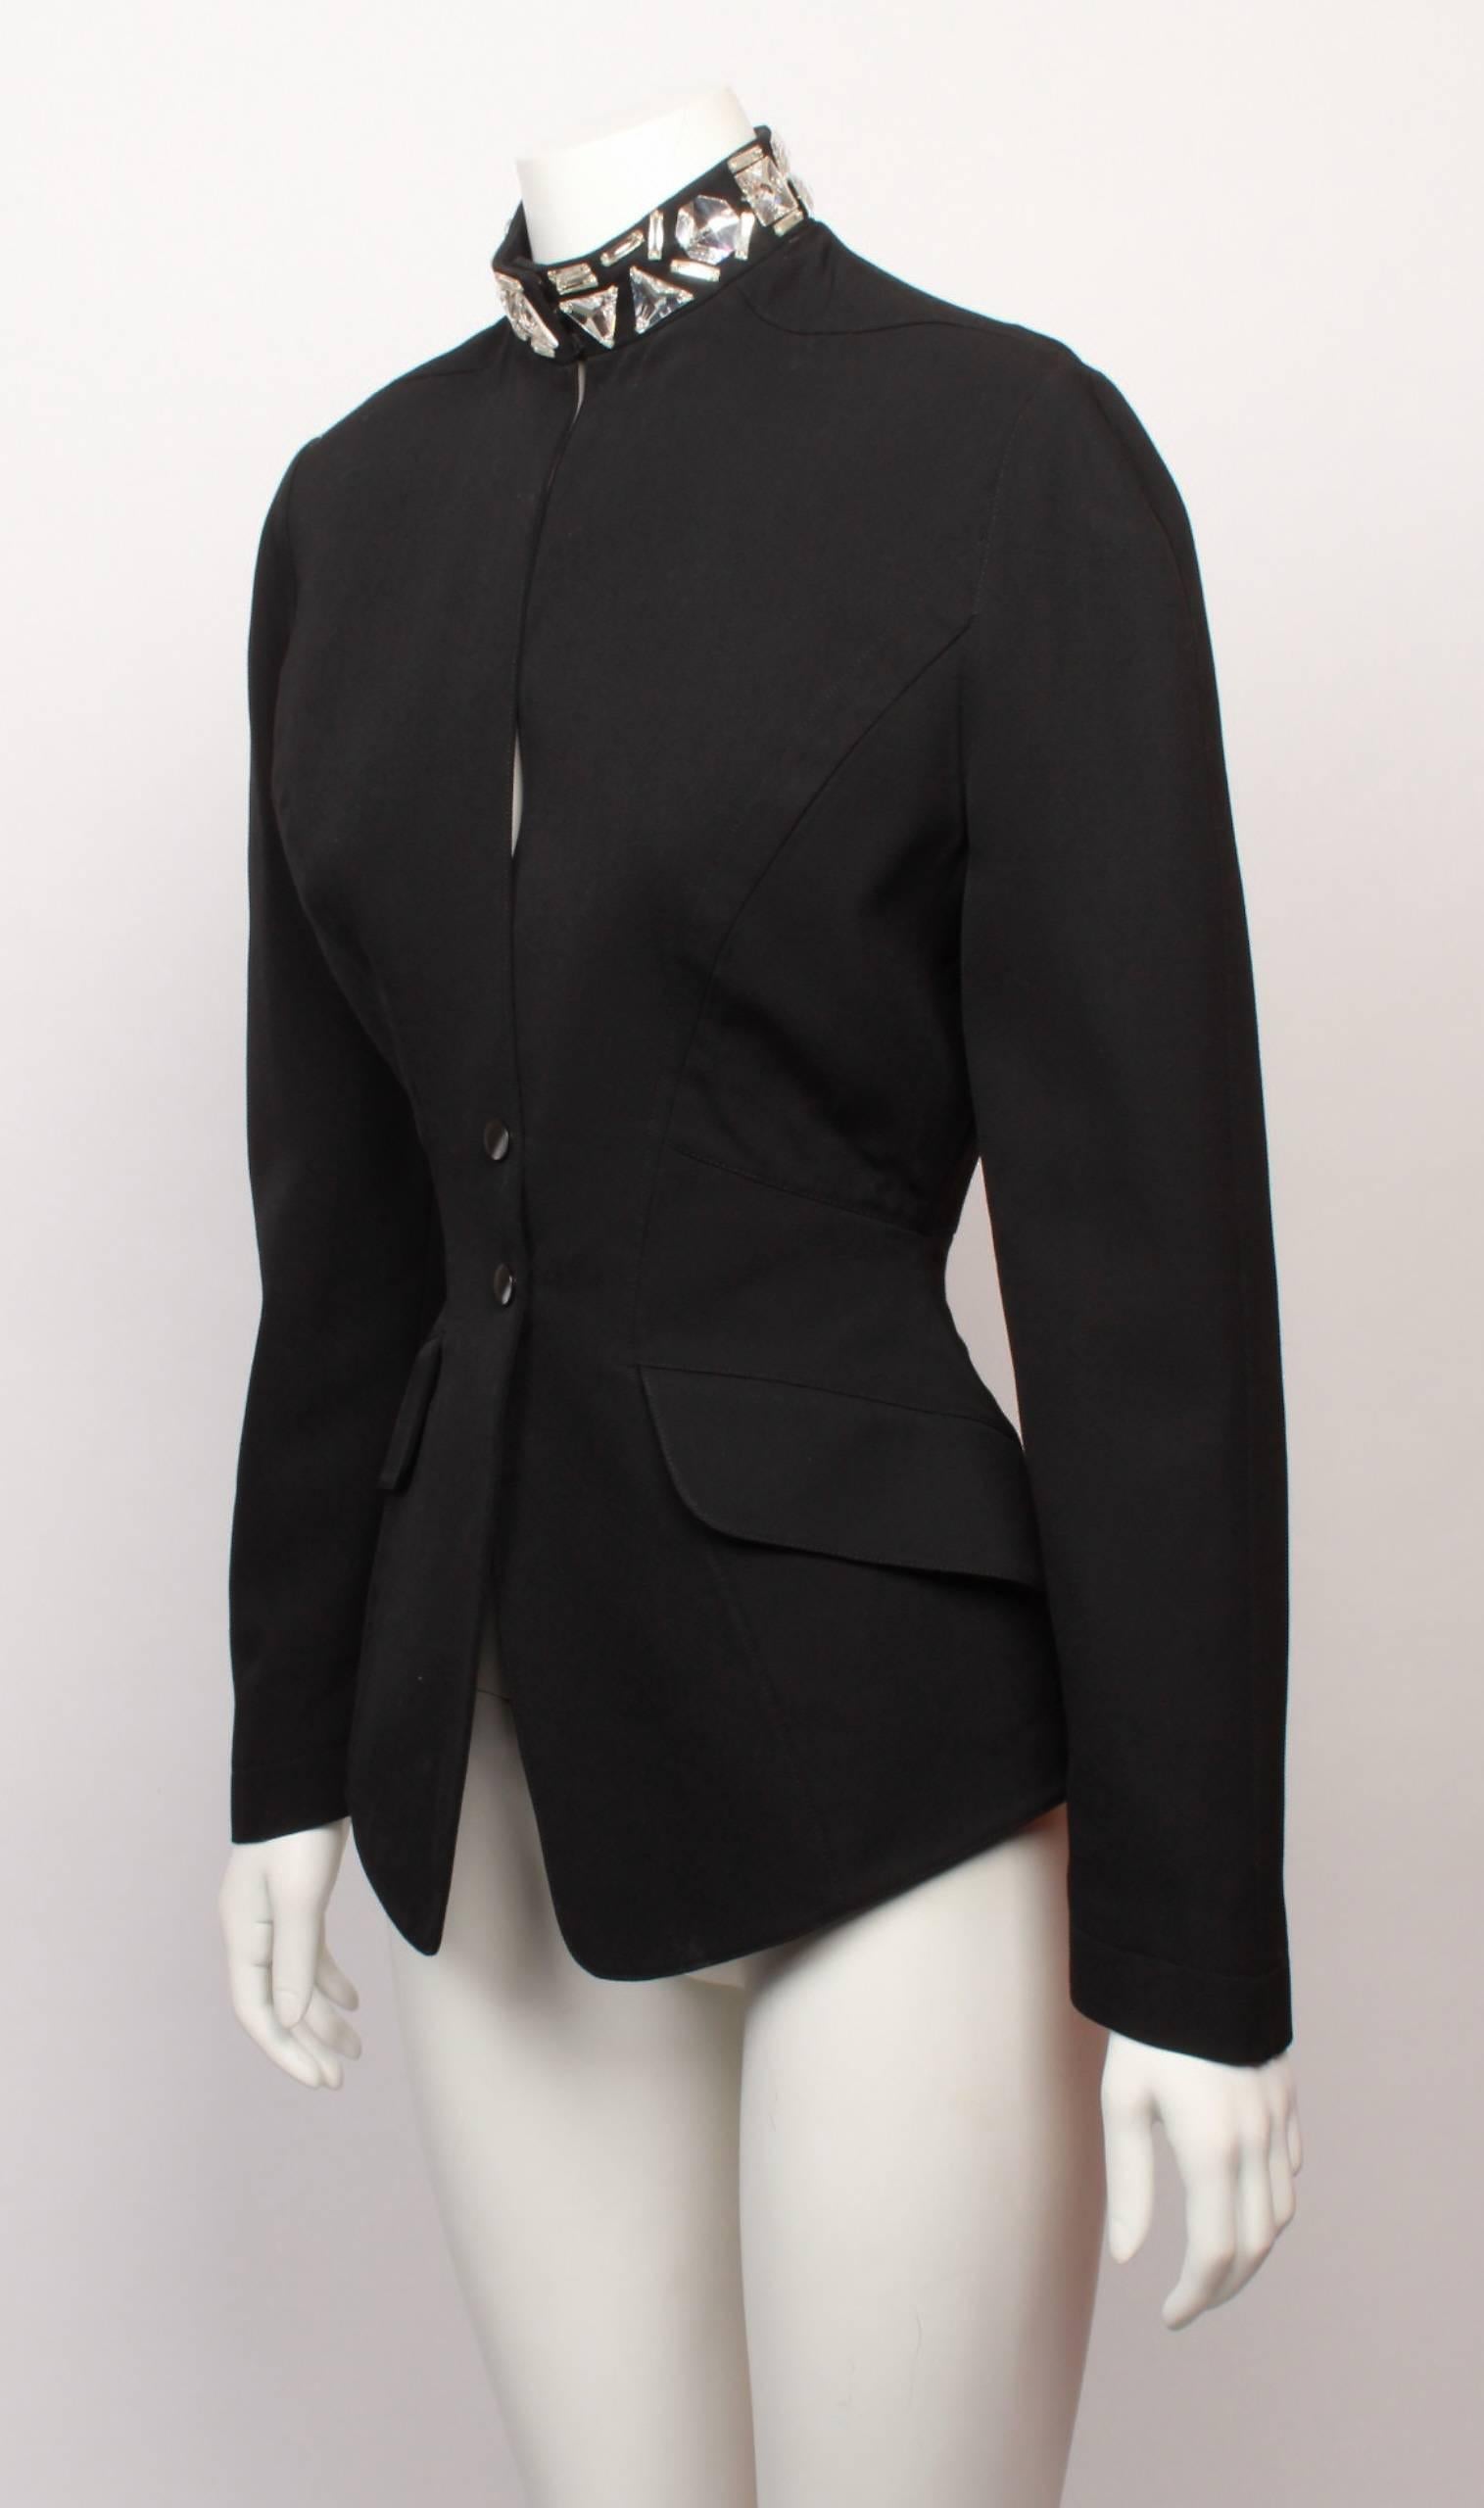 Iconic 1980s sculptural and fitted Thierry Mugler black wool jacket with jewelled crystal collar.
The jacket is panelled to create a dramatic nipped in waist, and has soft, rounded shoulders, flap feature pockets and black press stud fastening.